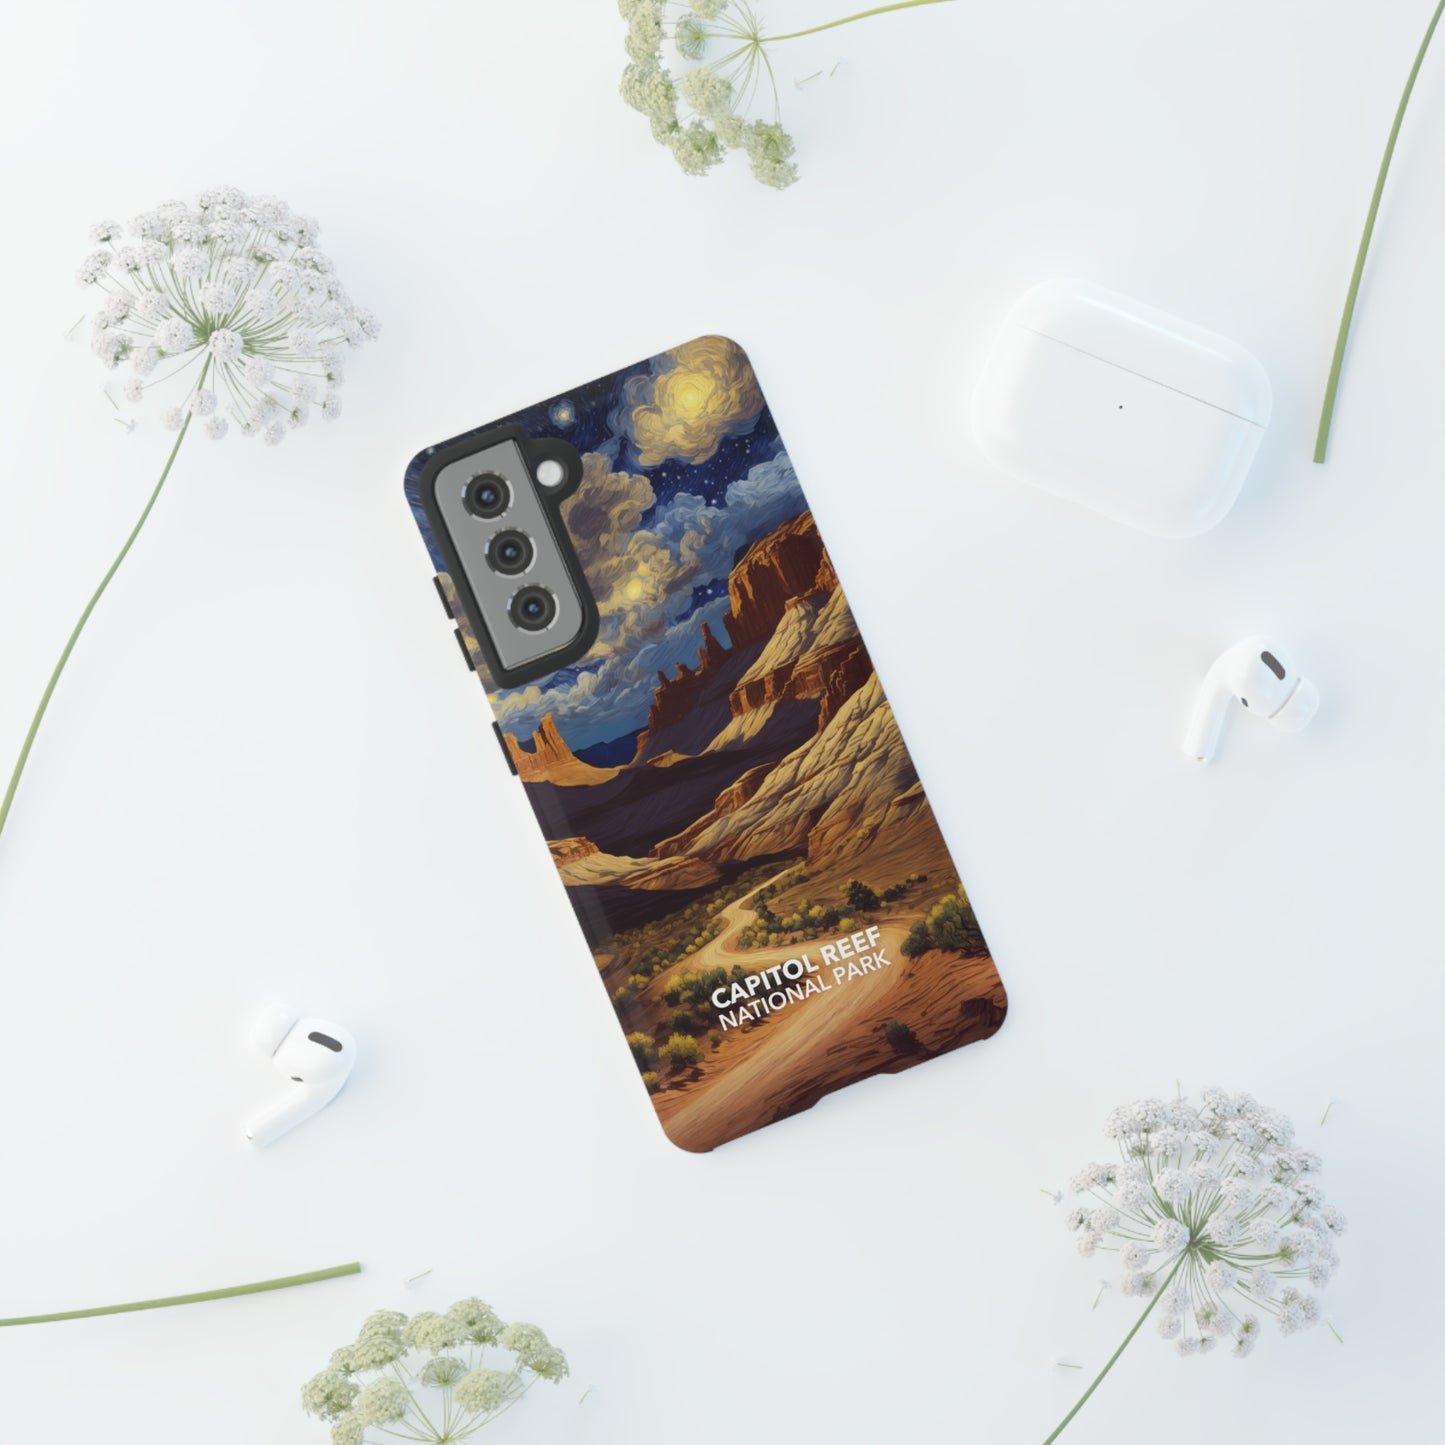 Capitol Reef National Park Phone Case - Starry Night